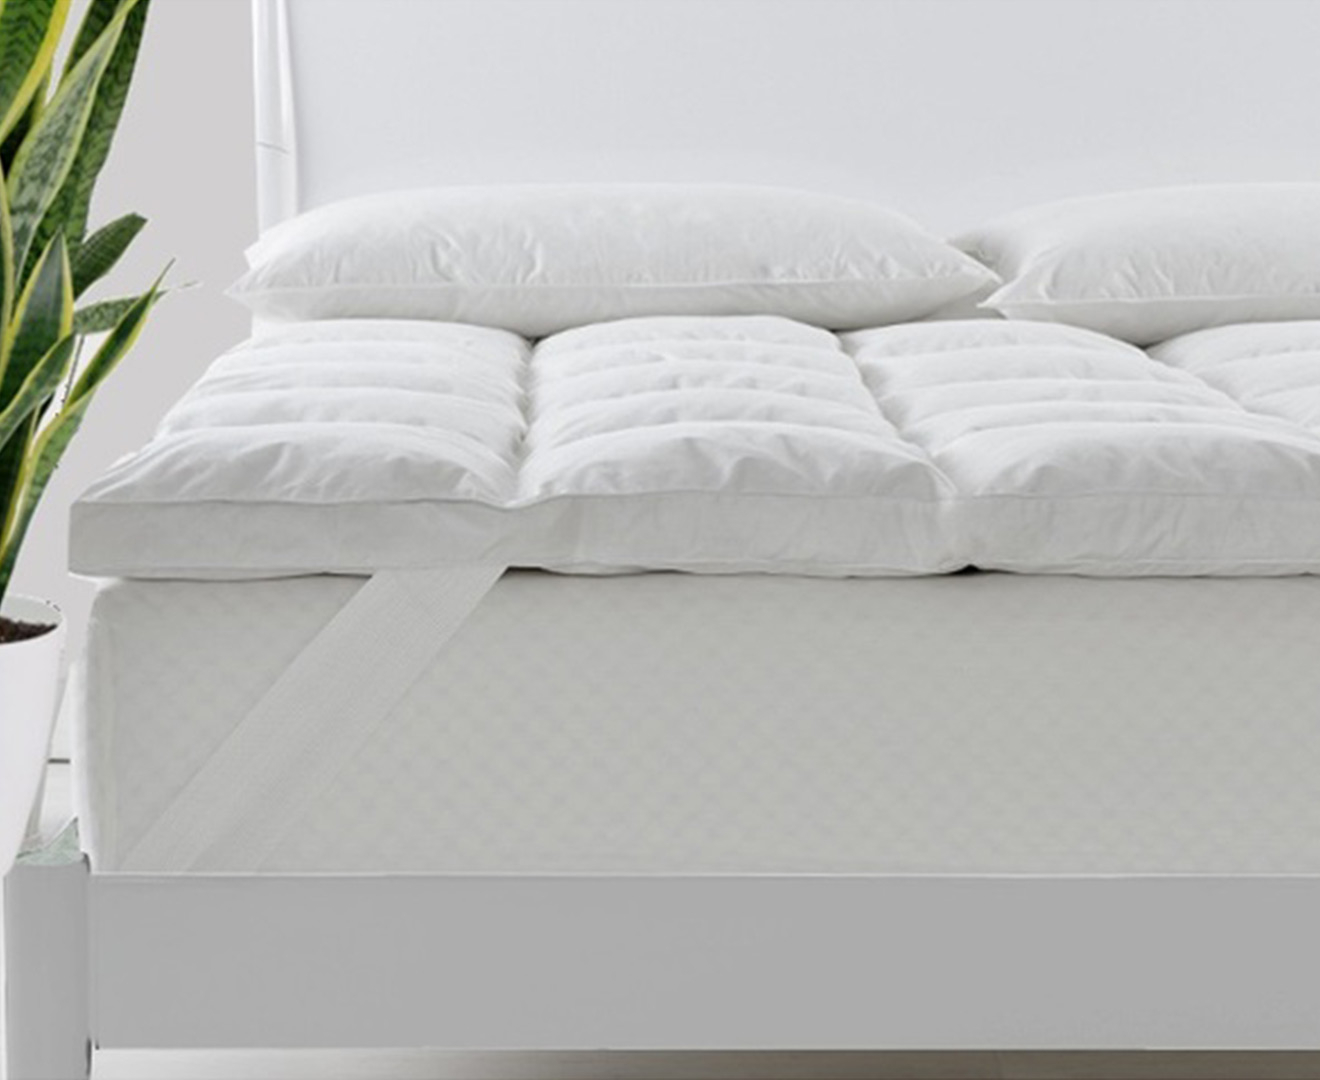 royal comfort duck feather and down mattress topper